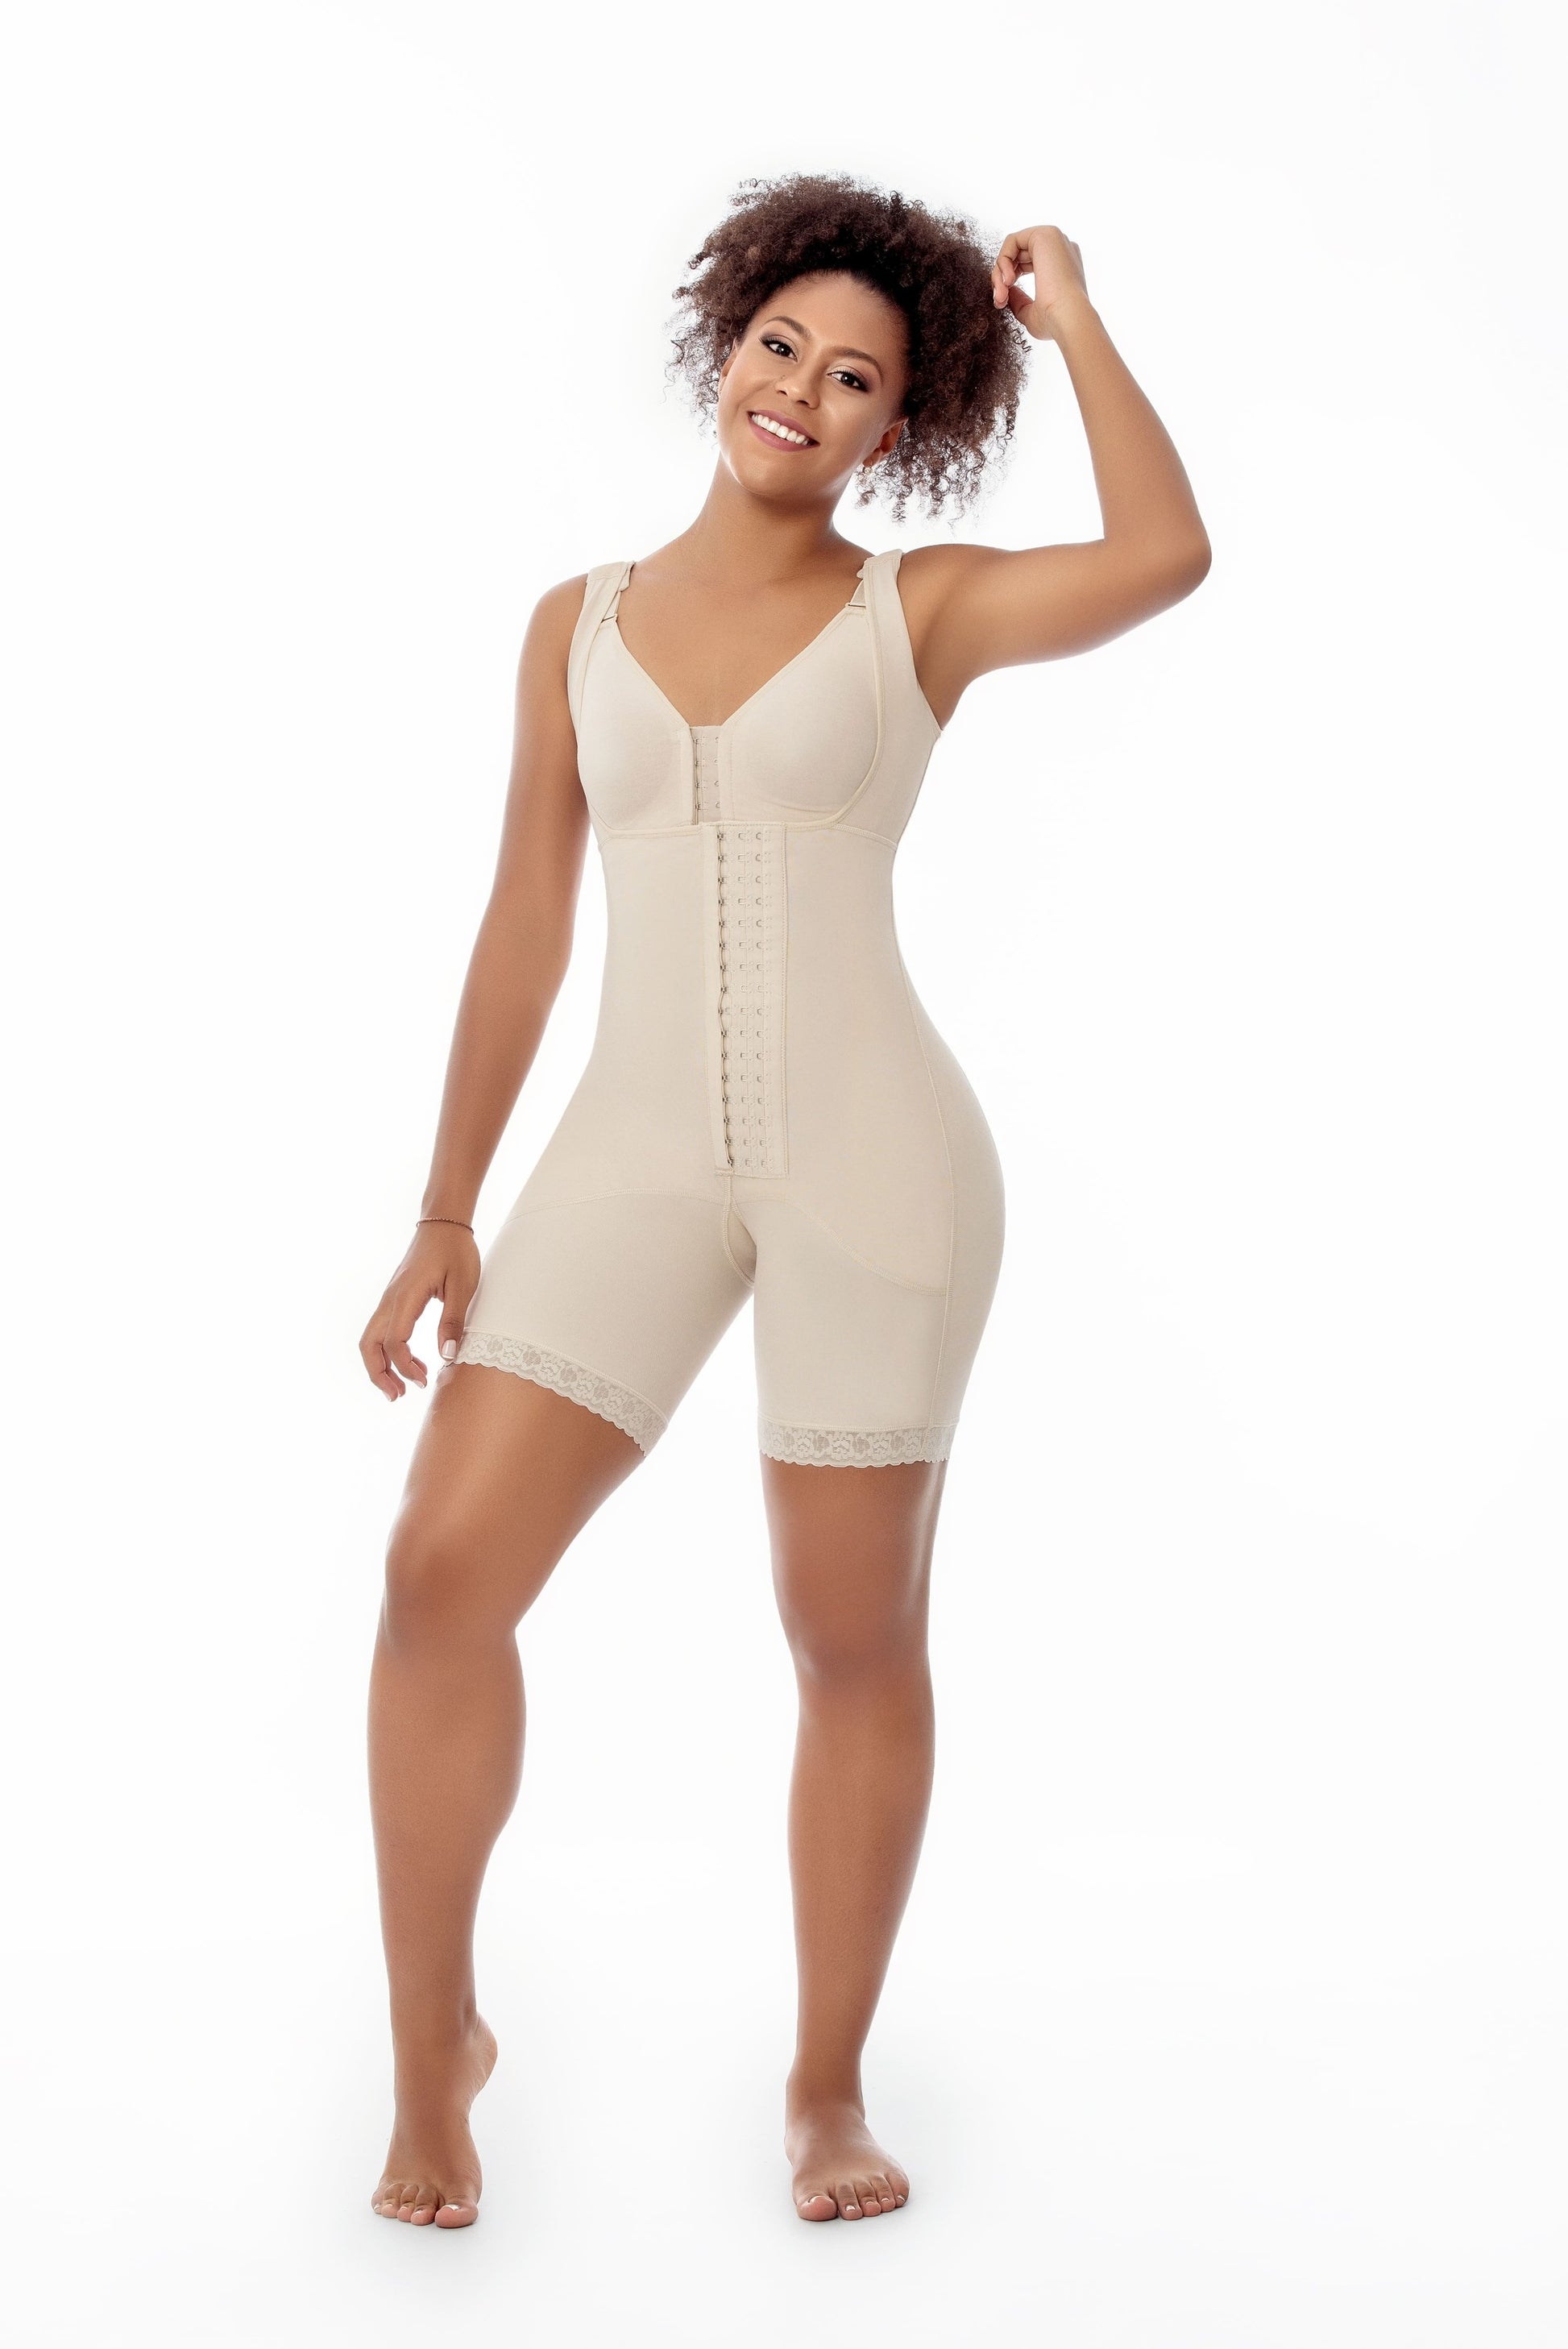 Stage 1 Compression Bundle: Option 6 (Braless full body above the